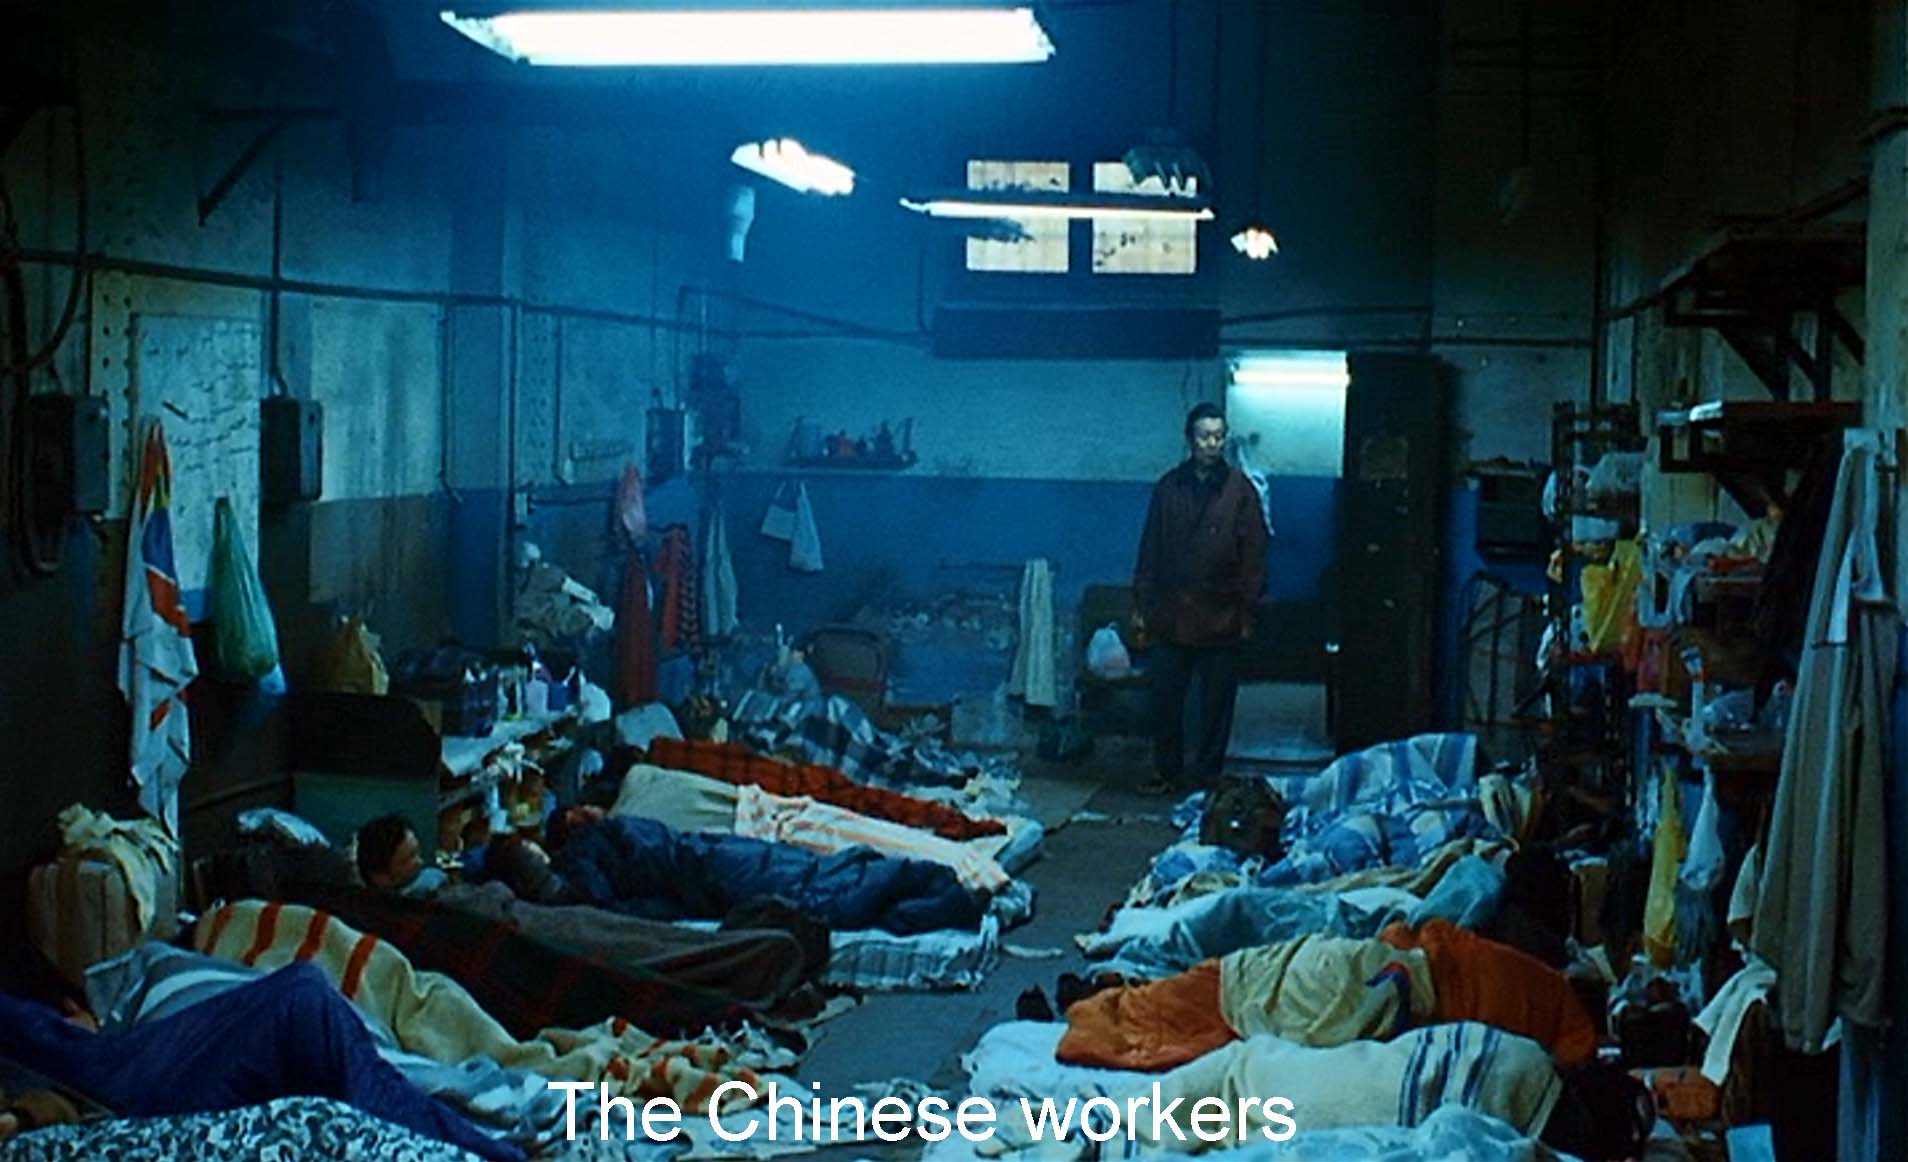 The Chinese workers